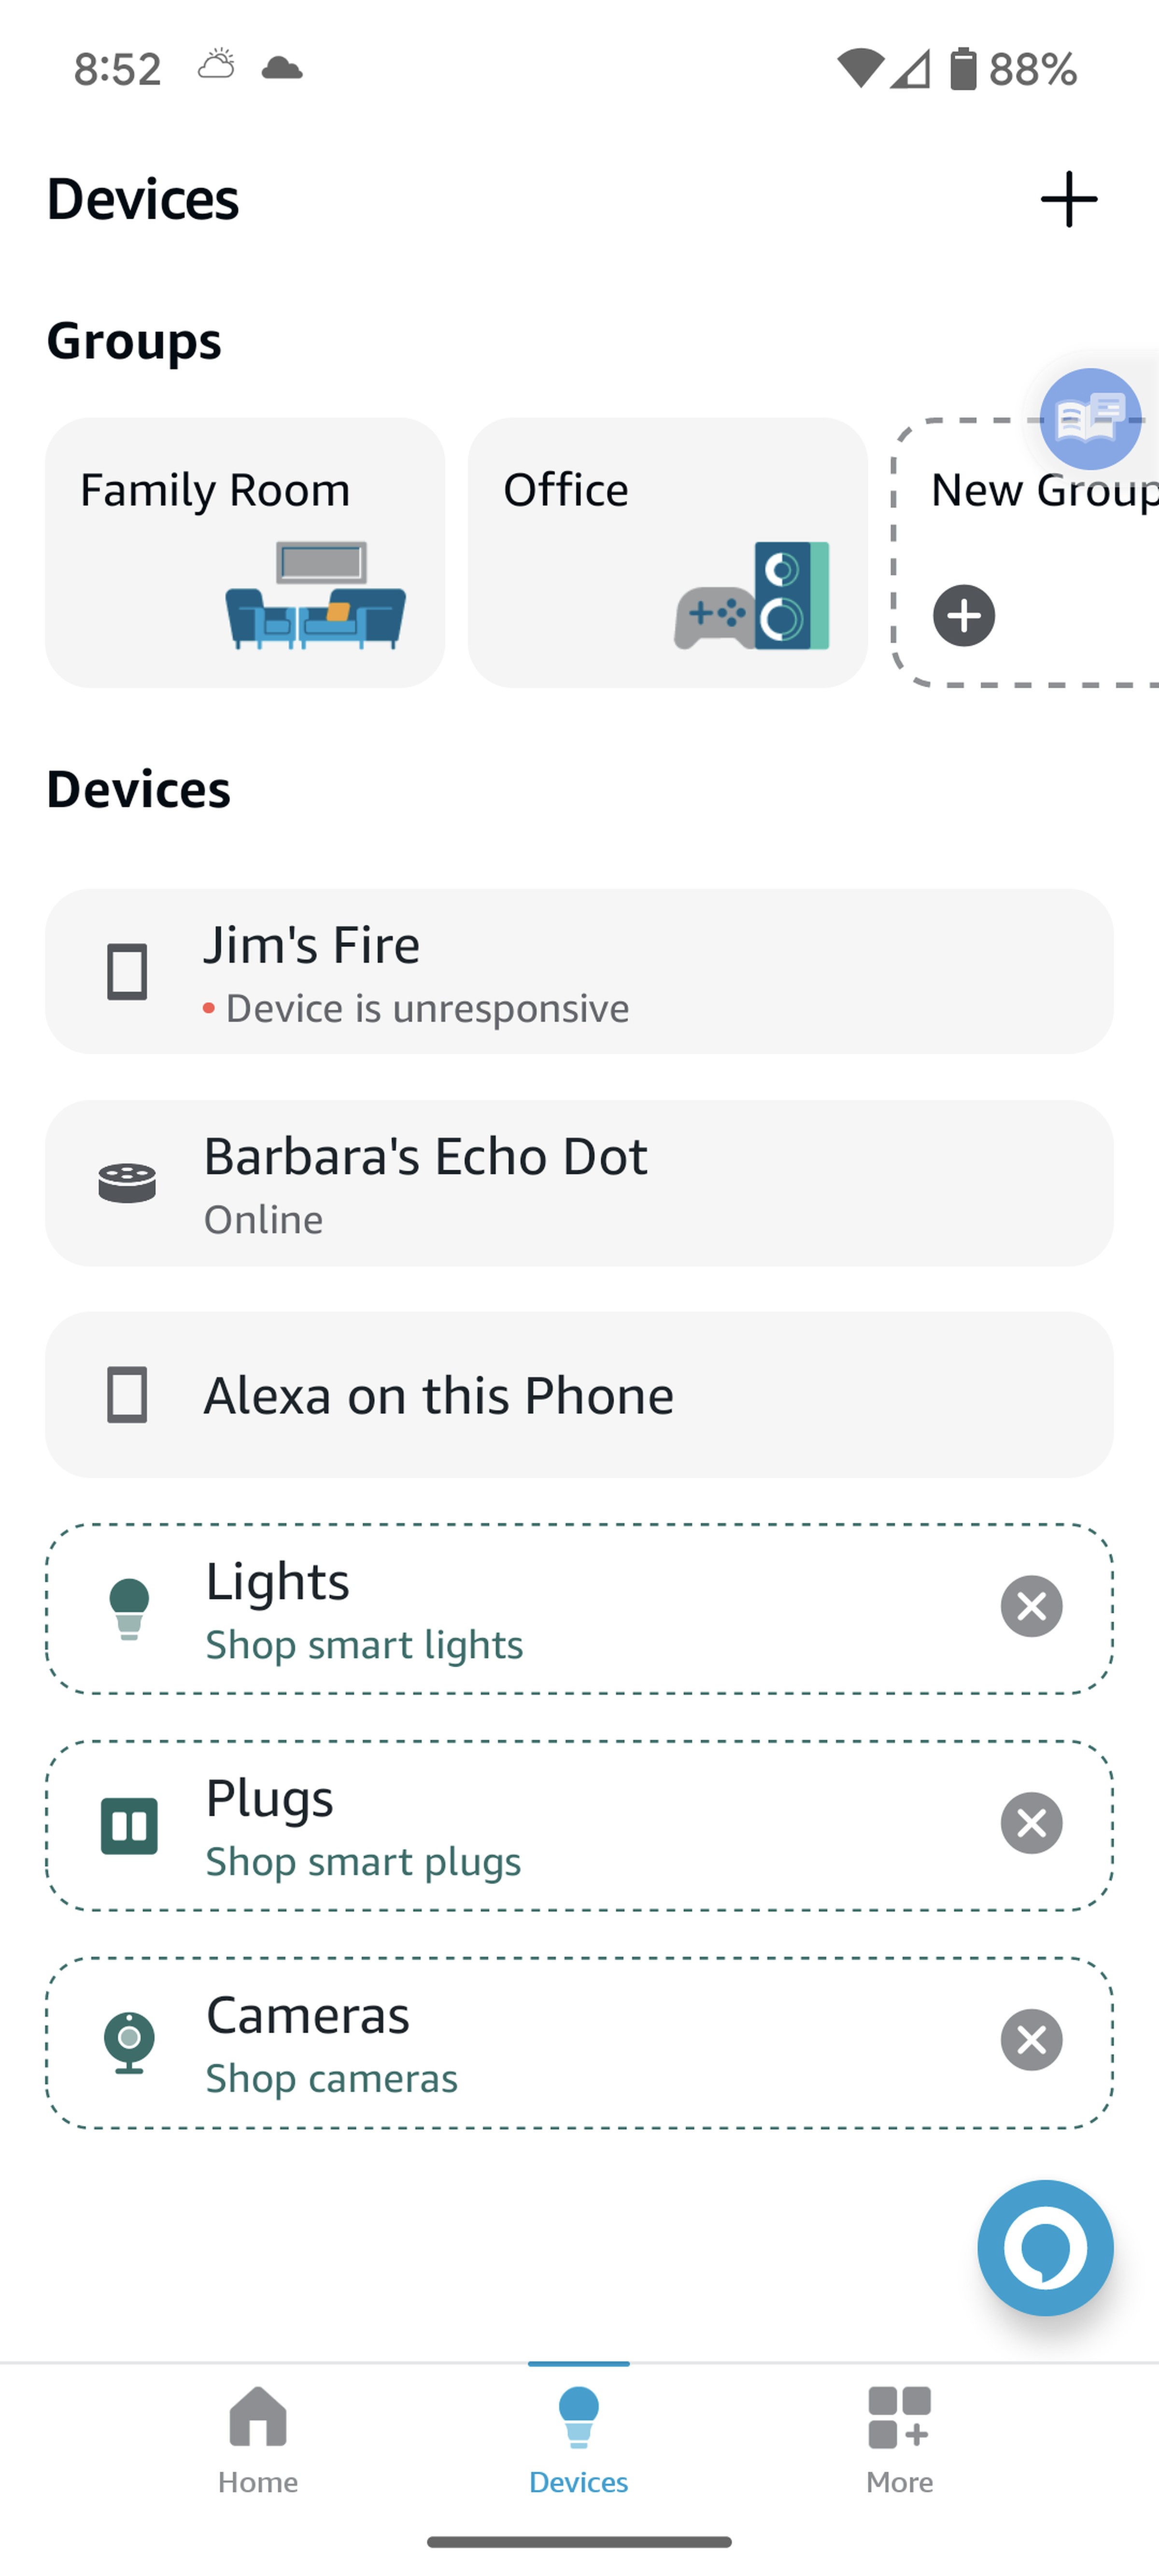 Devices page on mobile with lists of Groups and Devices.